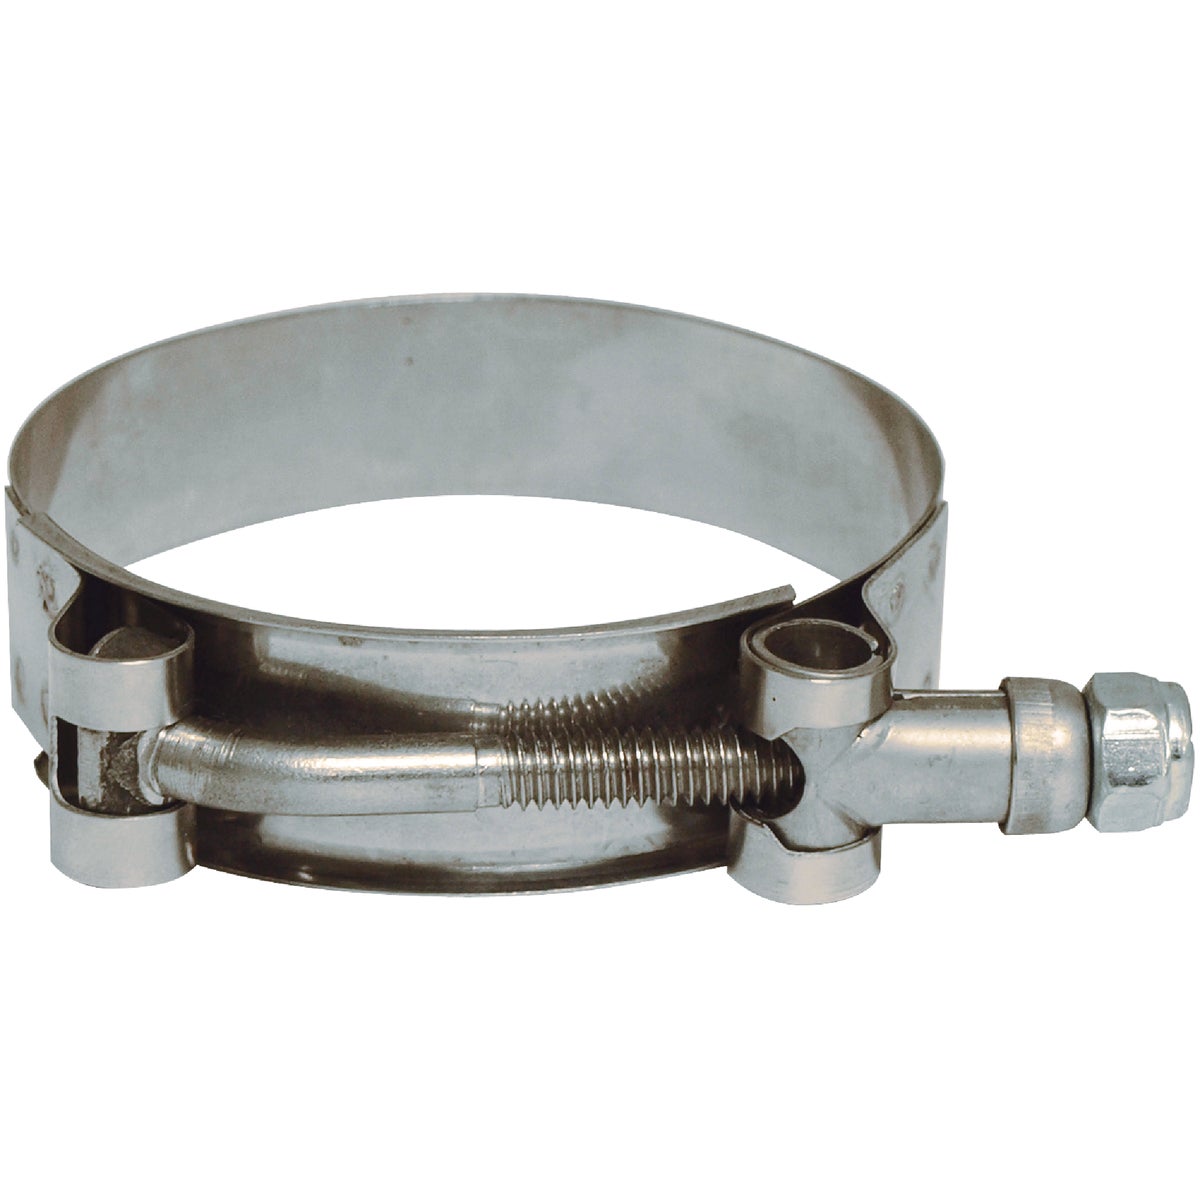 Apache 1-15/16 In. x 2-3/16 In. Stainless Steel T-Bolt Clamp